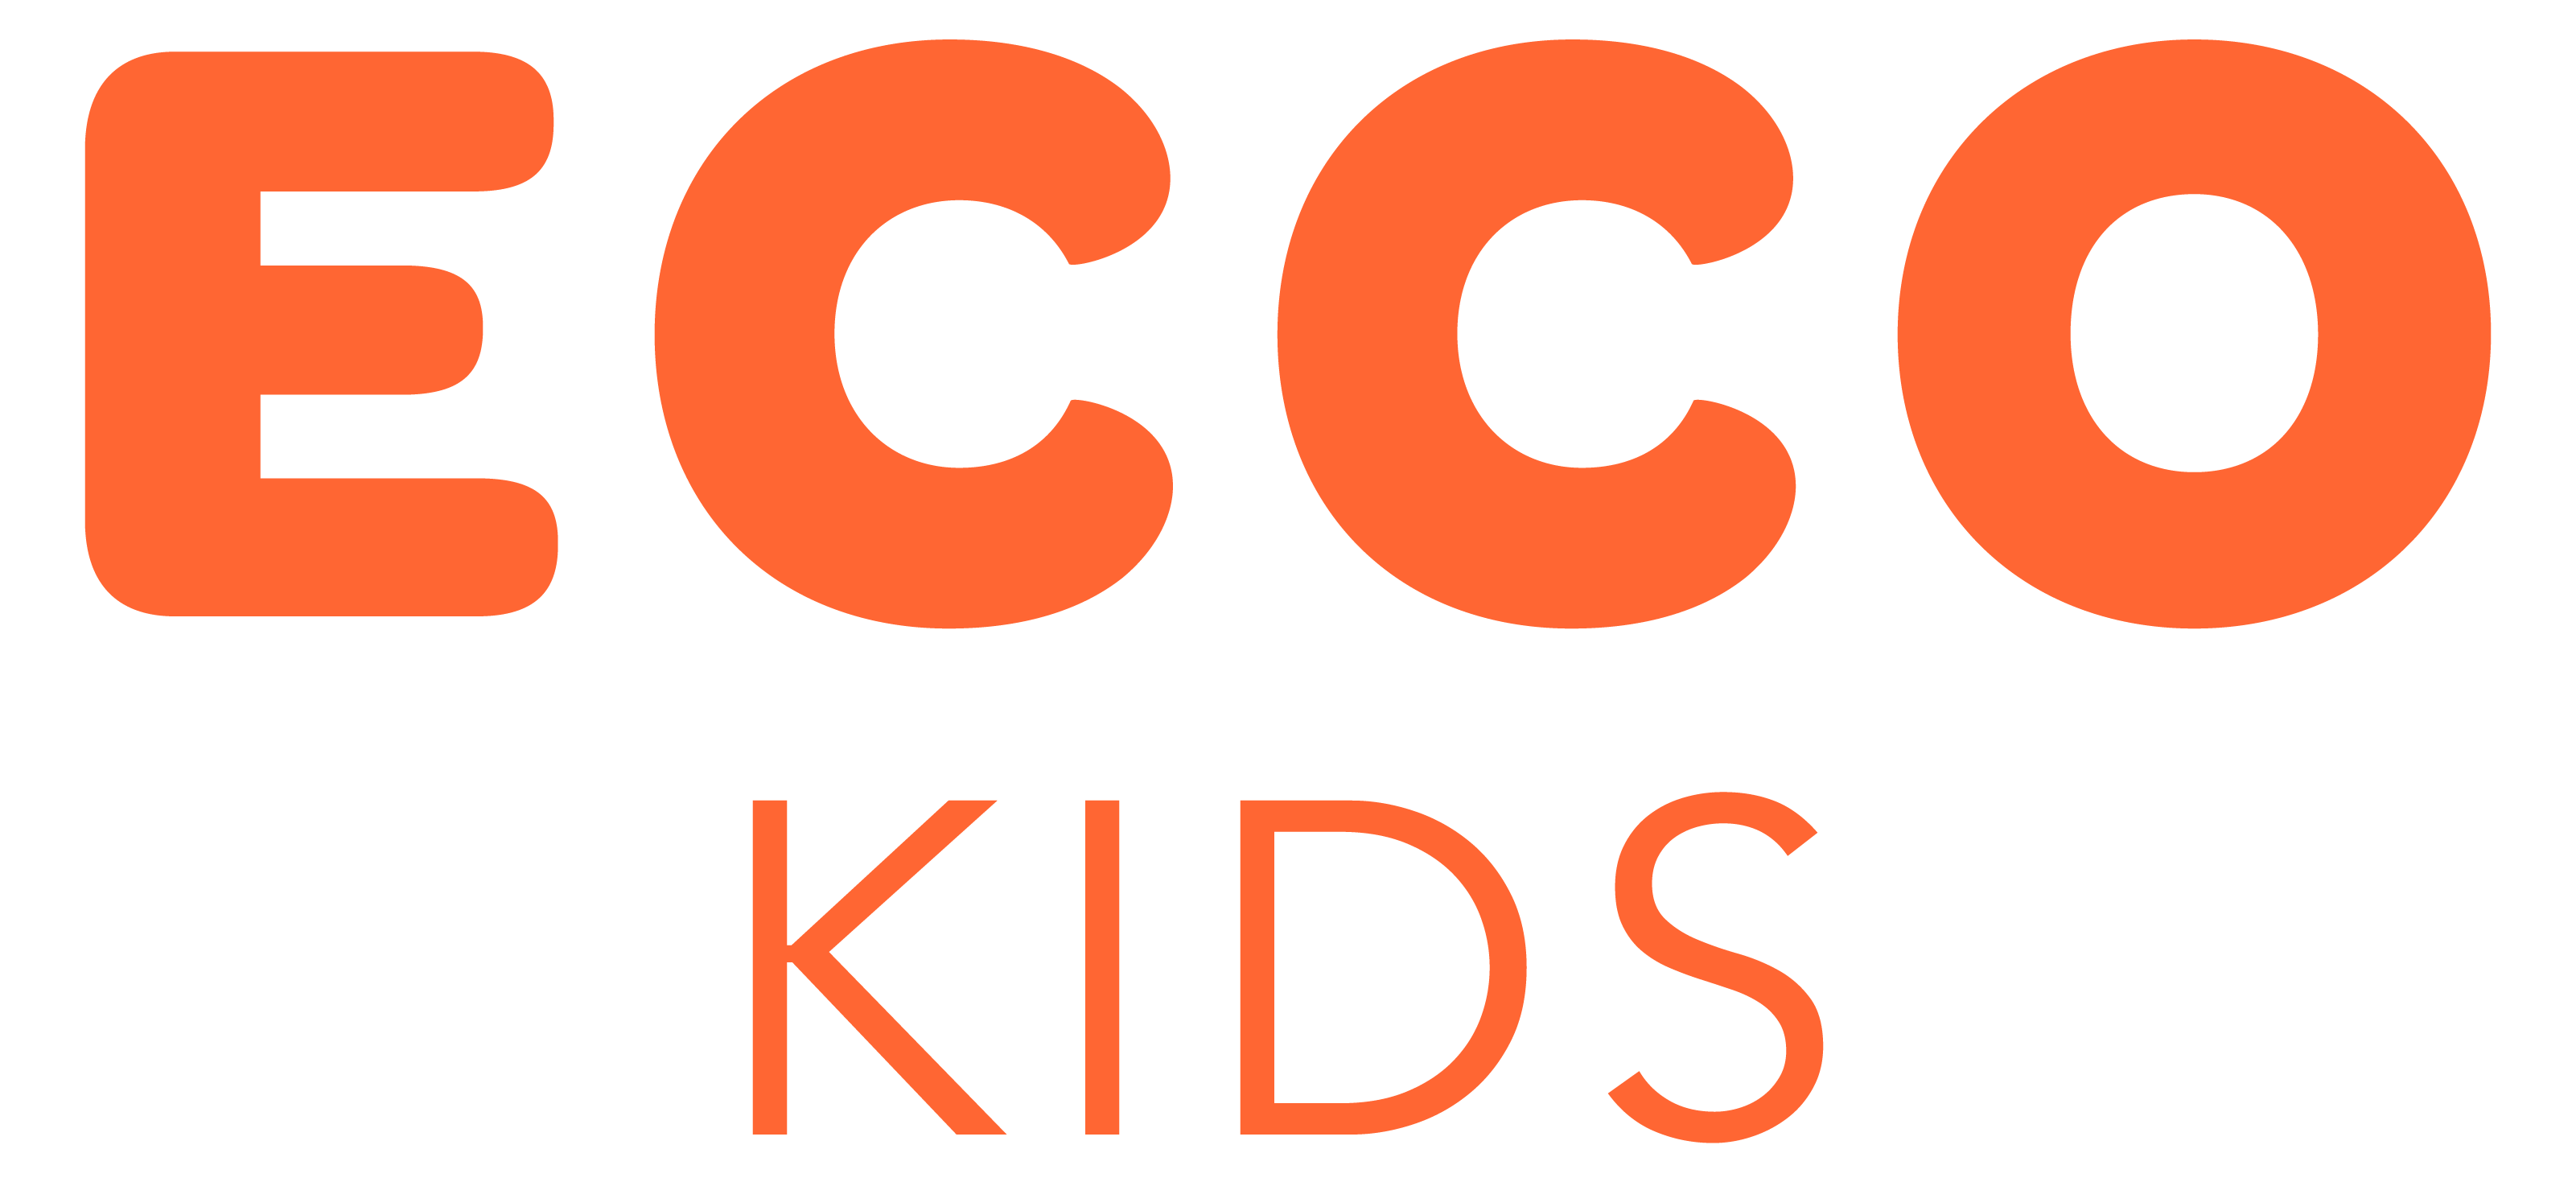 ECCO Kids - Engaging Childcare